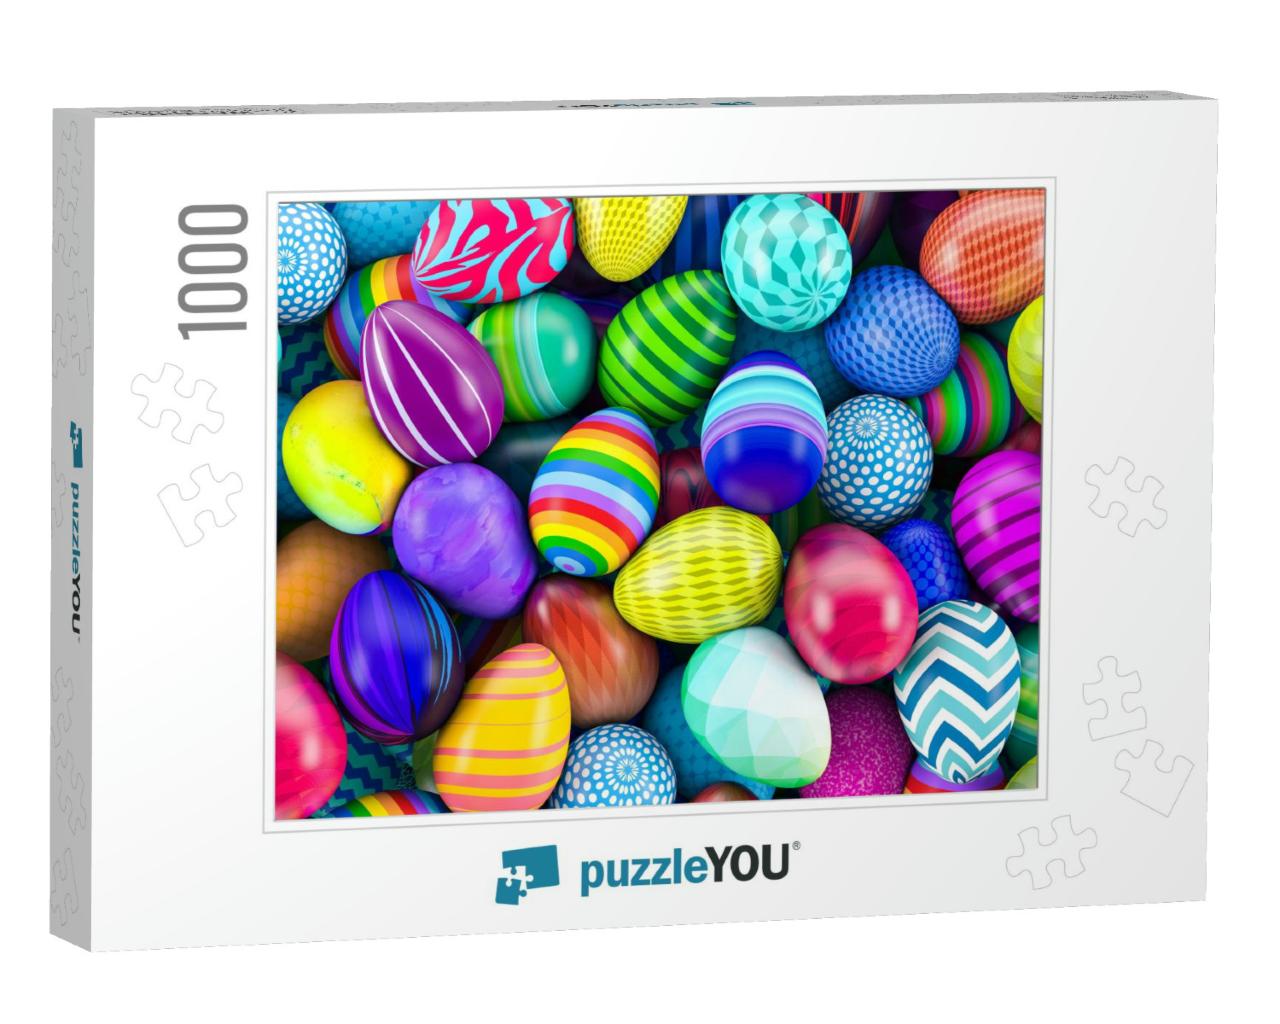 Pile of Colorful Easter Eggs 3D Illustration... Jigsaw Puzzle with 1000 pieces